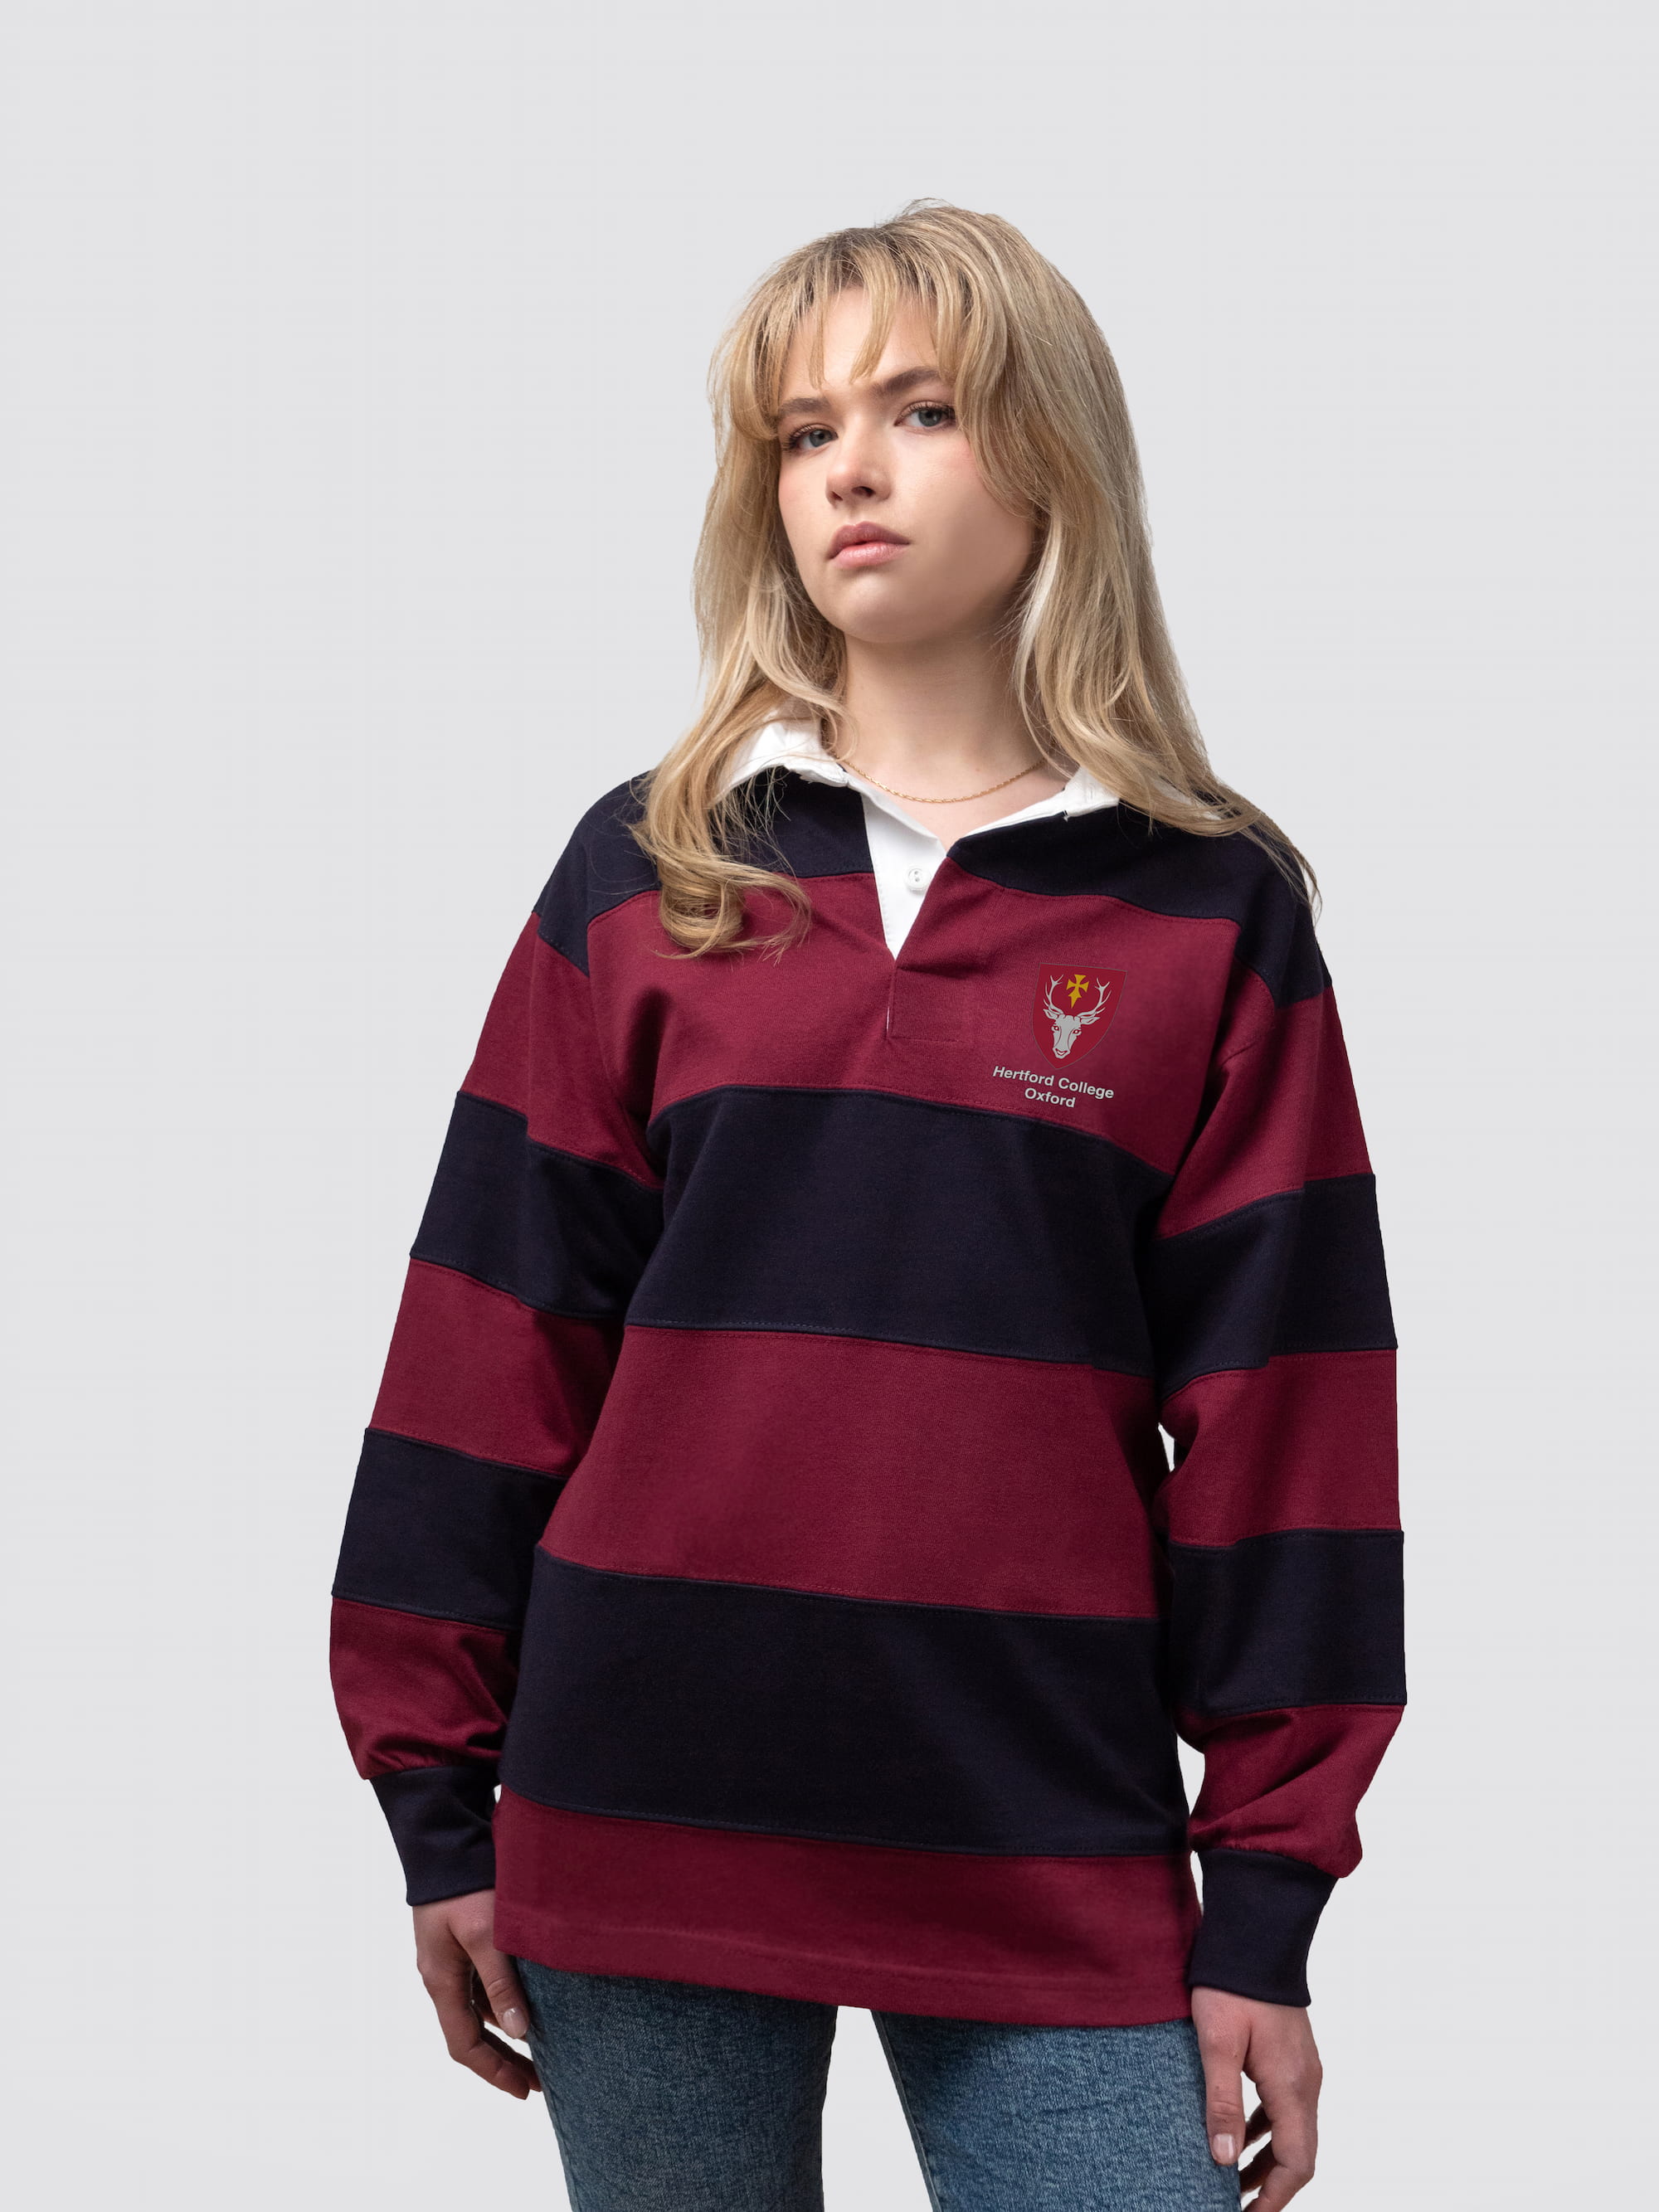 Hertford College rugby shirt, with burgundy and navy stripes